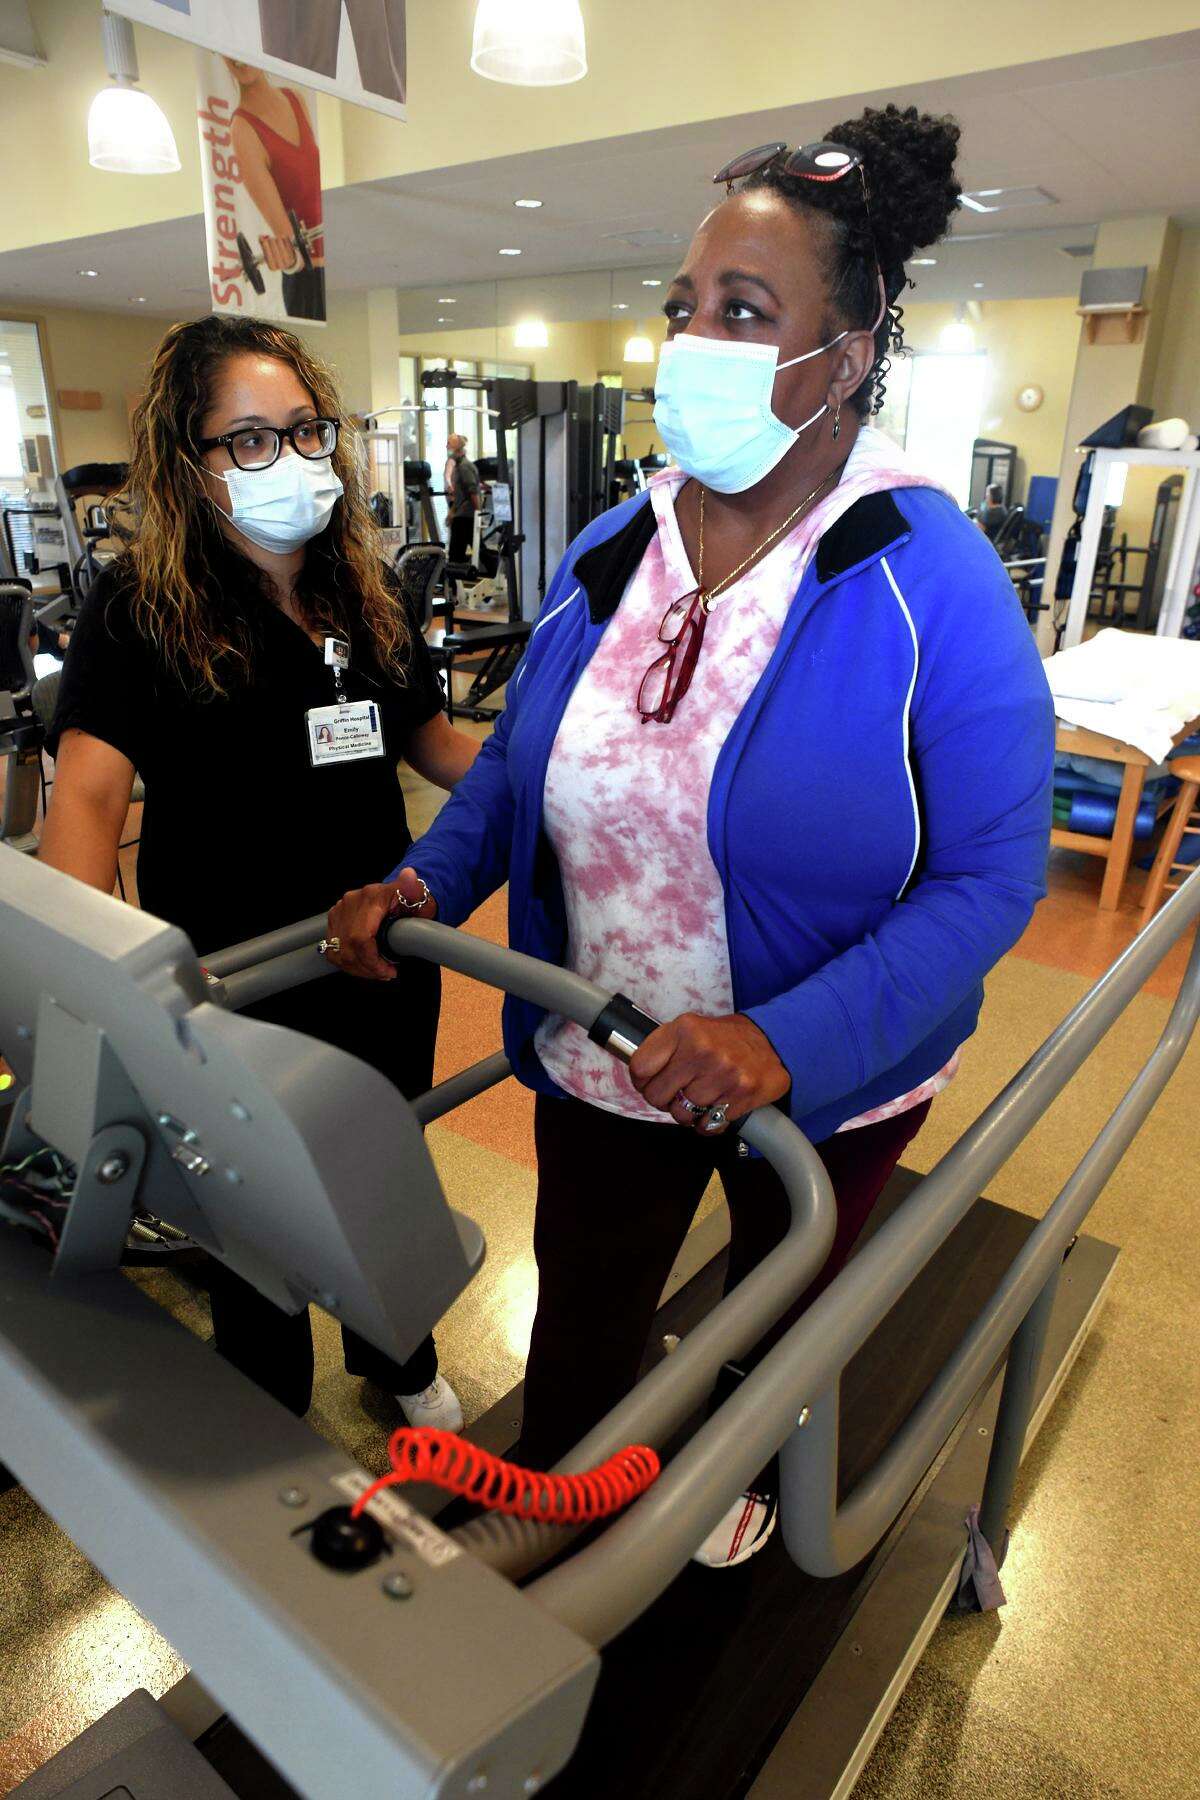 Pamela R. Lopes, of Woodbridge, a long term COVID patient, walks on a treadmill with physical therapist Emily Ponce-Calloway at Griffin Health’s physical therapy and rehabilitation facility in Derby, Conn. Aug. 10, 2022.